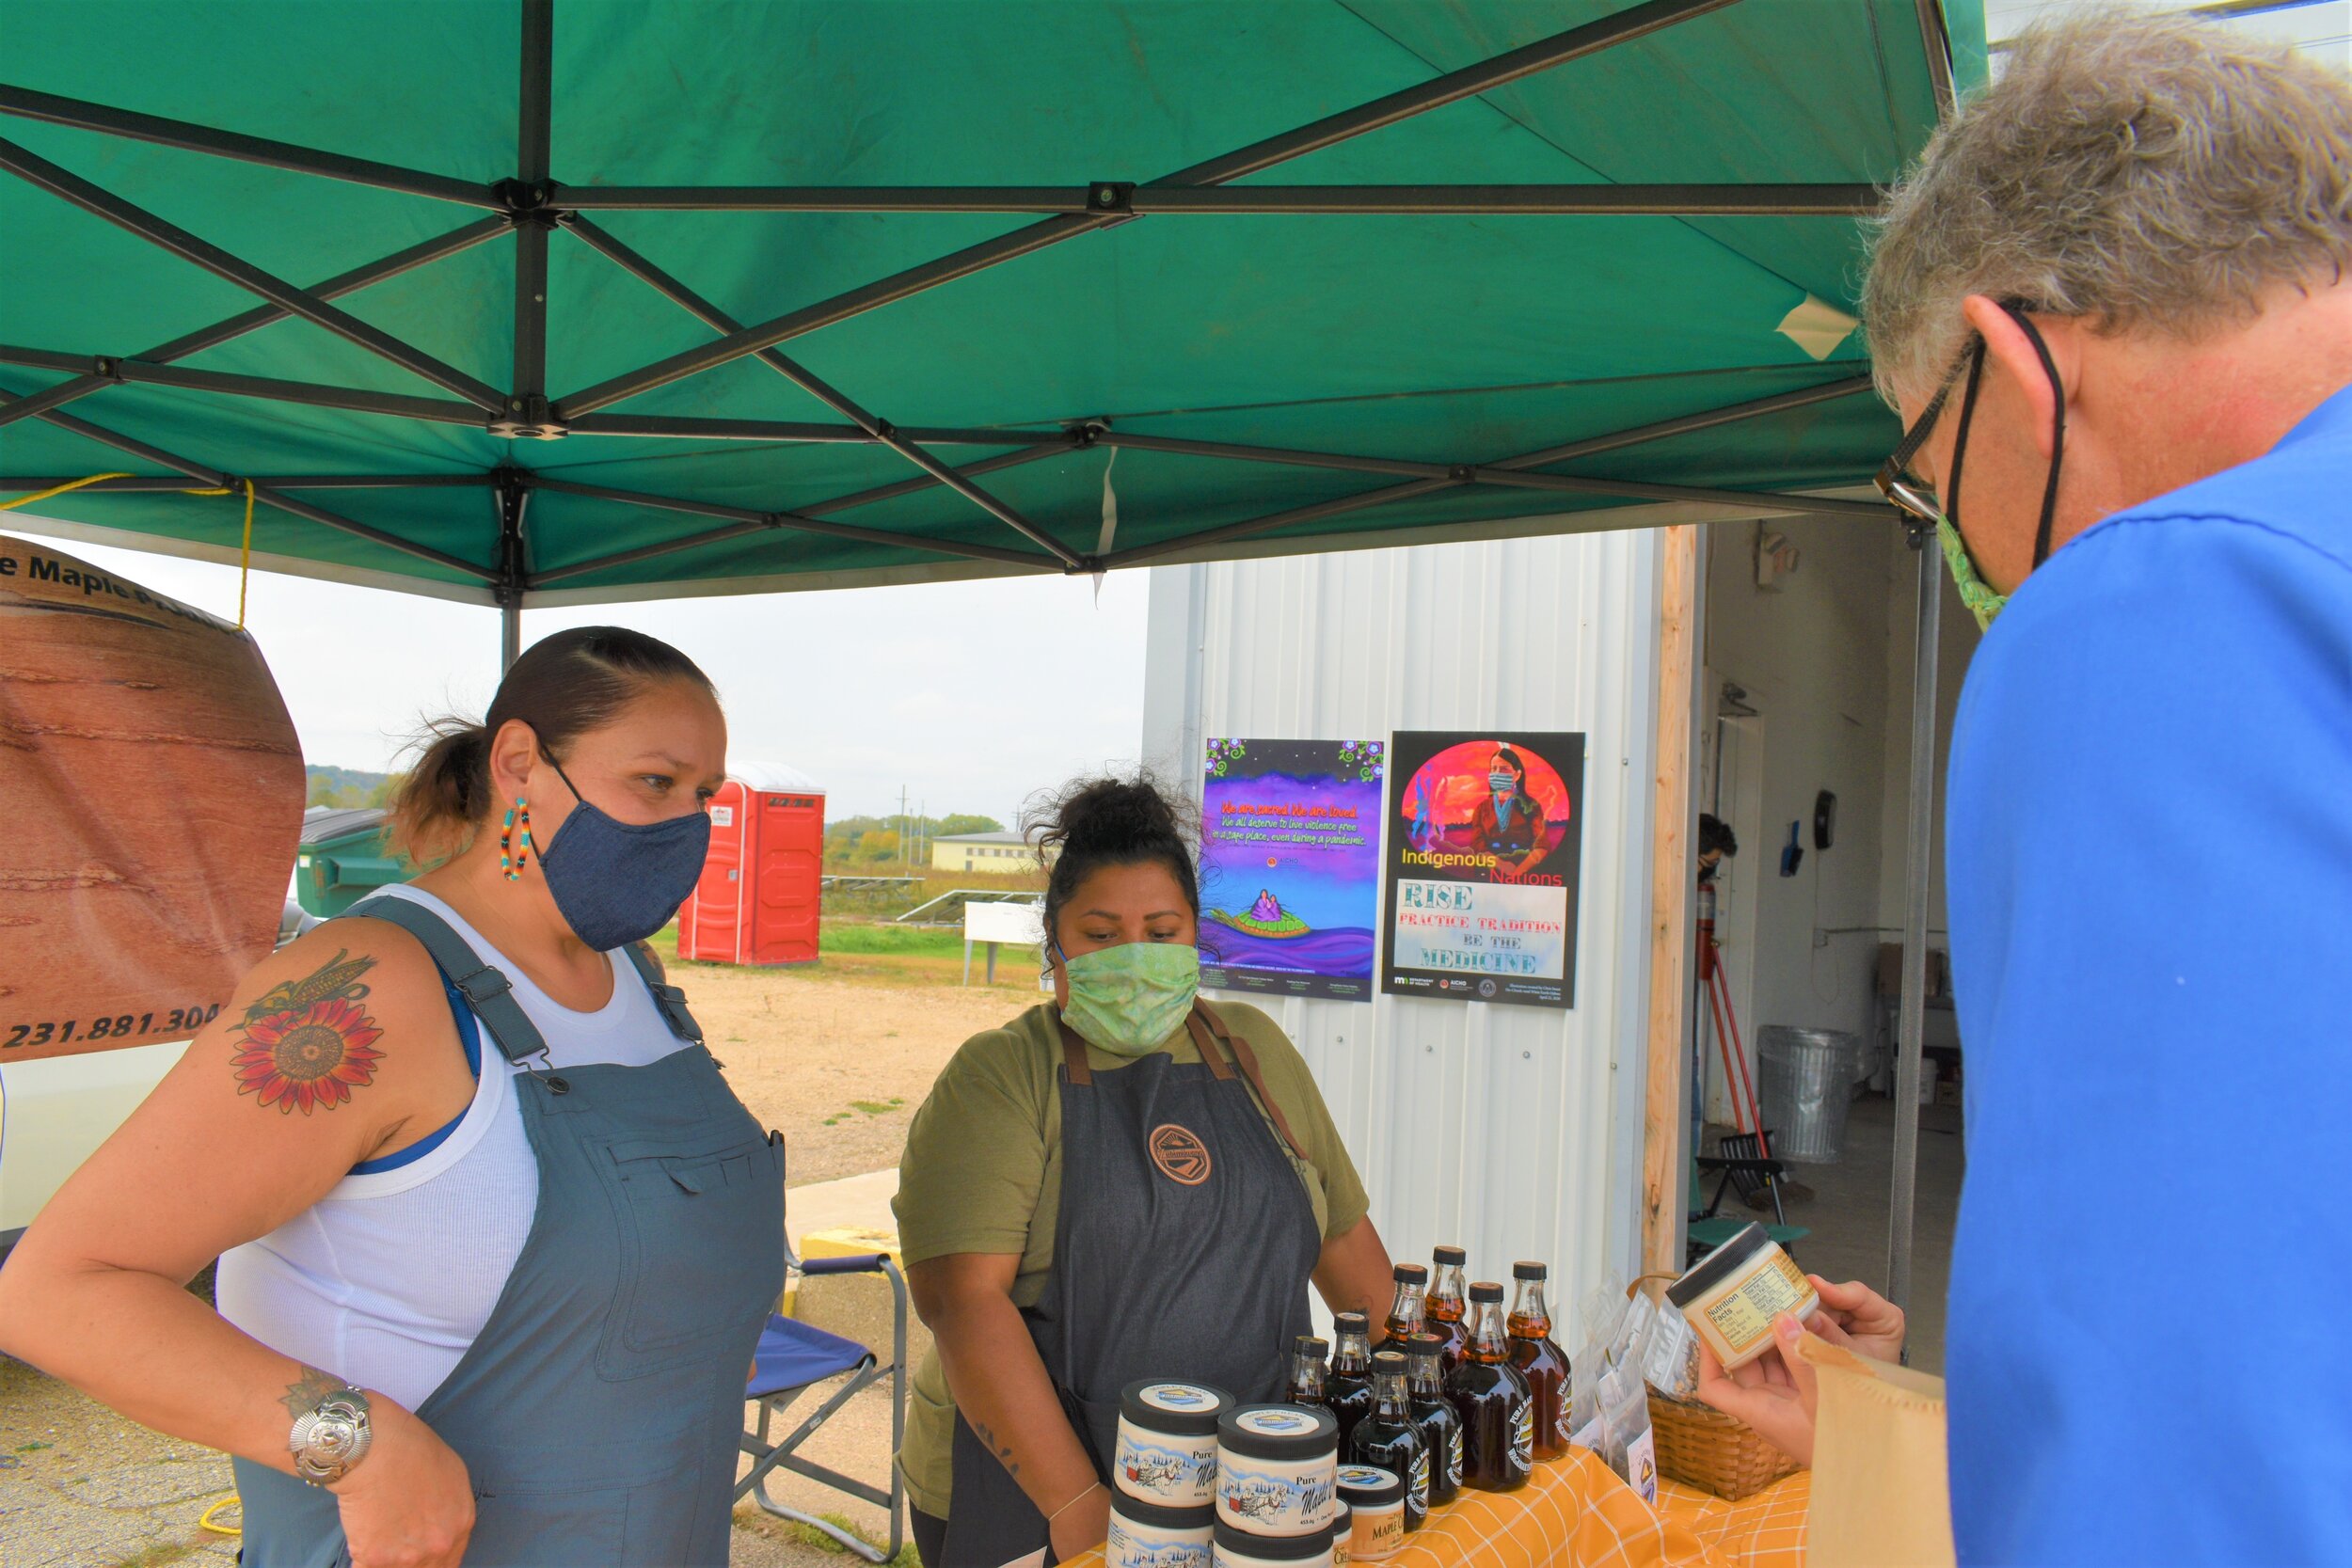  Left, Hoocąk and Executive Chef and Founder of Wild Bearies Elena Terry, with Rosebud Bear Schneider working the Ziibimijwang Farms stand (Ziibimijwang Bay Bands of Odawa Indians Carp Lake, Michigan) as part of the Honoring the Farmers, Foragers, Gr